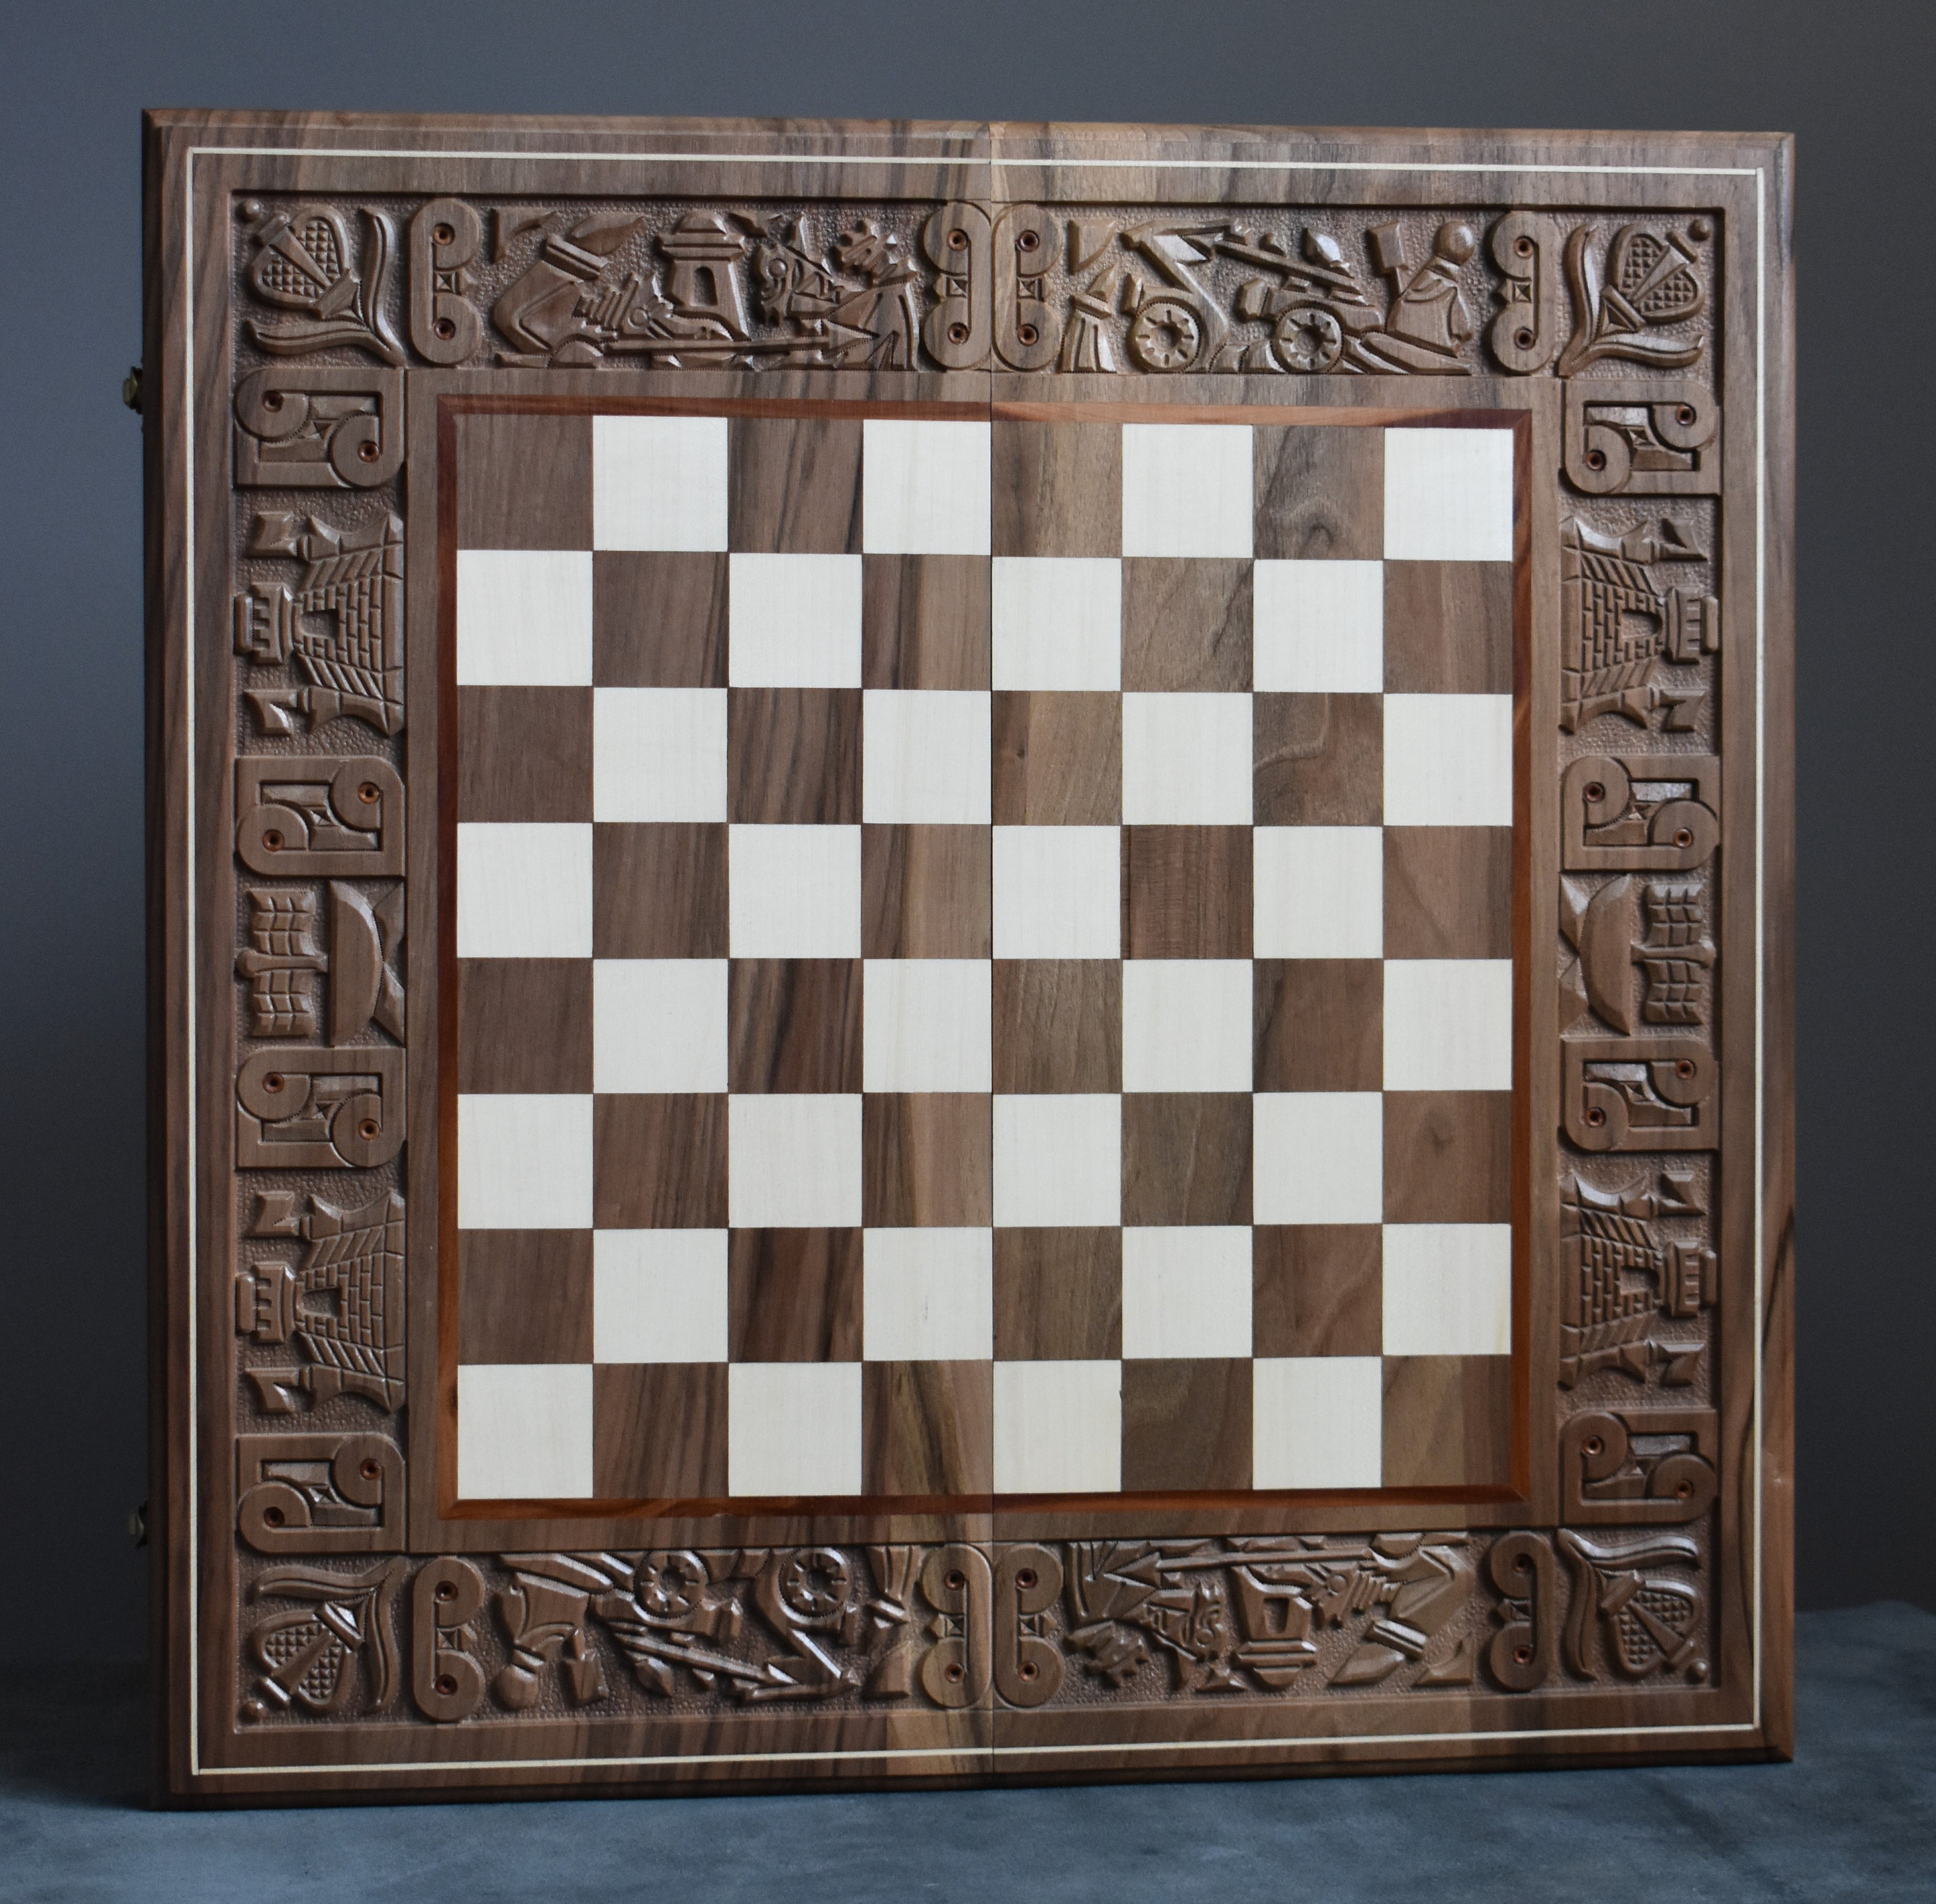 Handmade Chess Board Handcrafted Large Chess Set With Board 